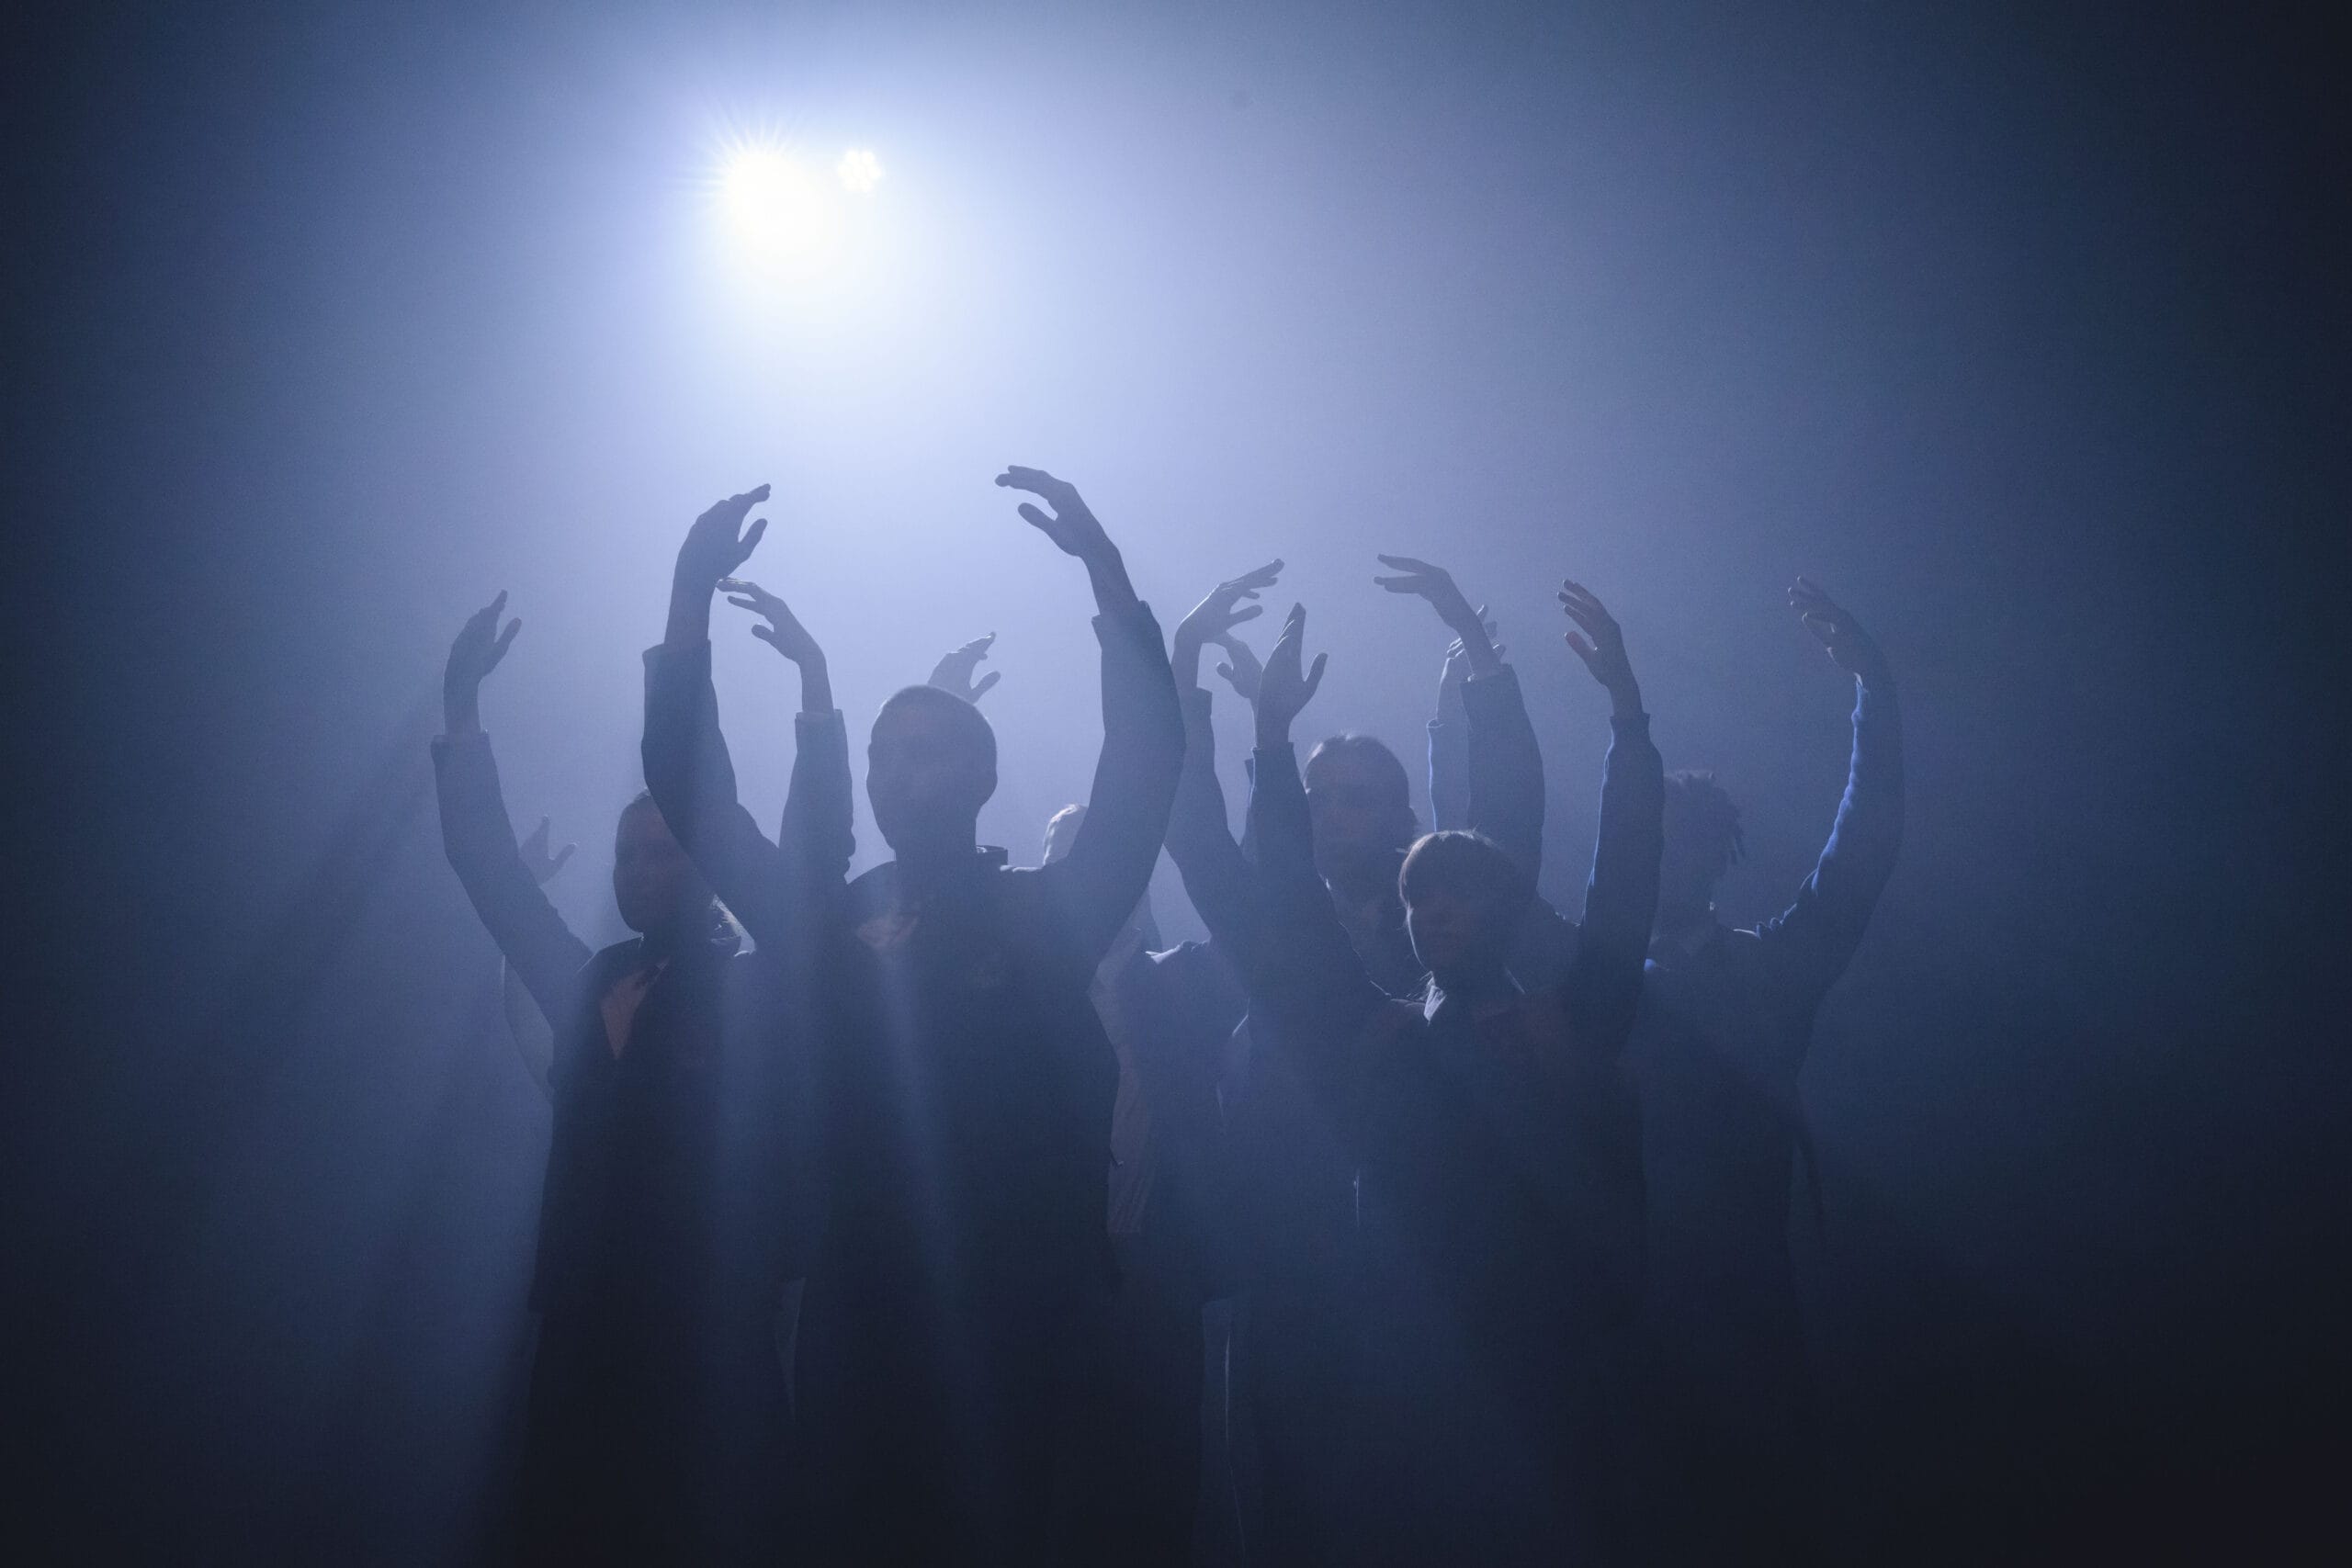 An ensemble of dancers stand in formation onstage with upstretched arms. A bold, blue light illuminates them from behind.